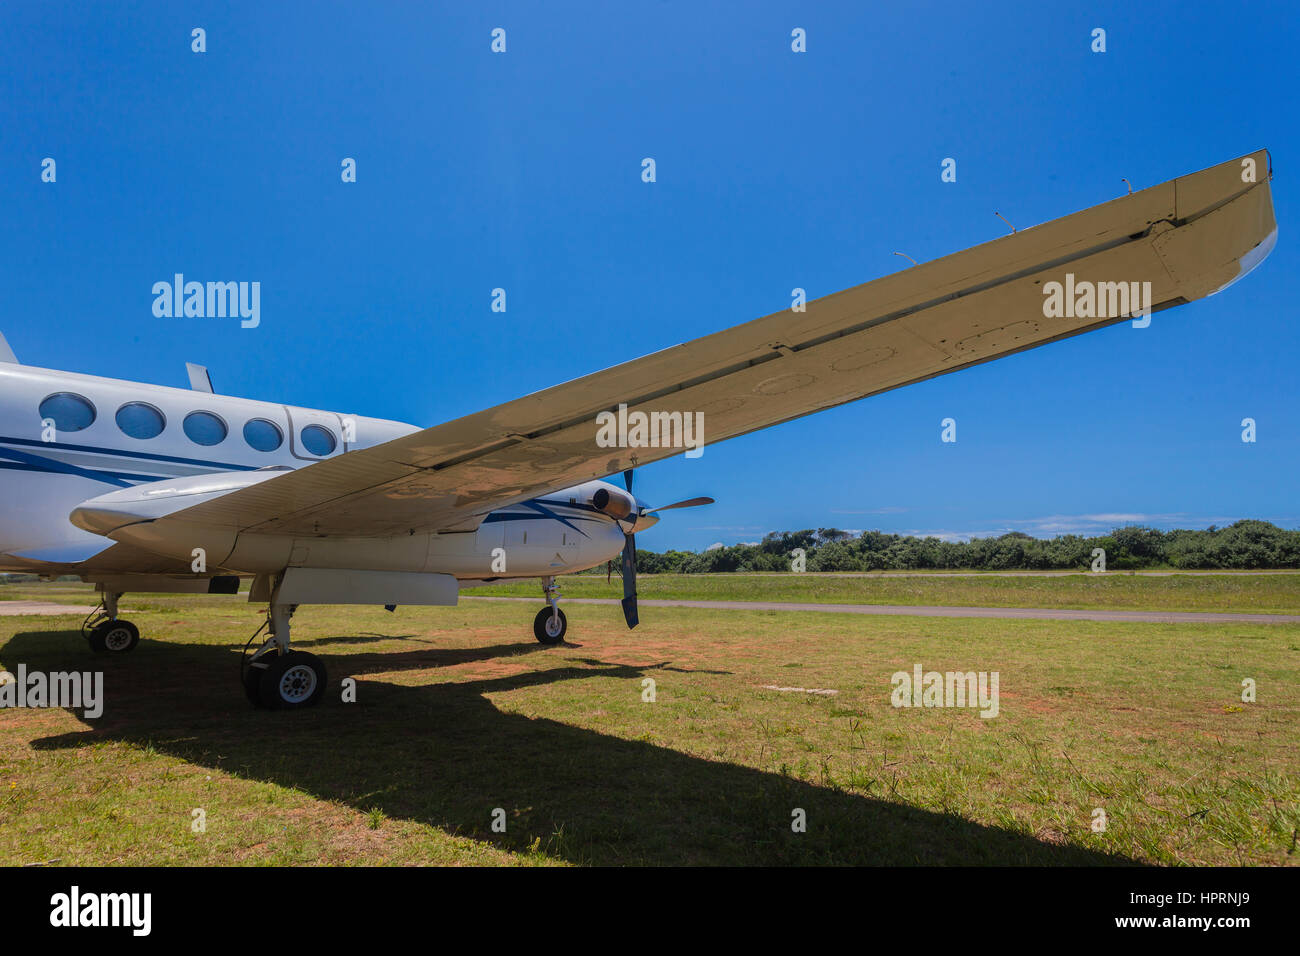 Plane twin engine propellor aircraft closeup rear front abstract on countryside airstrip summers day Stock Photo